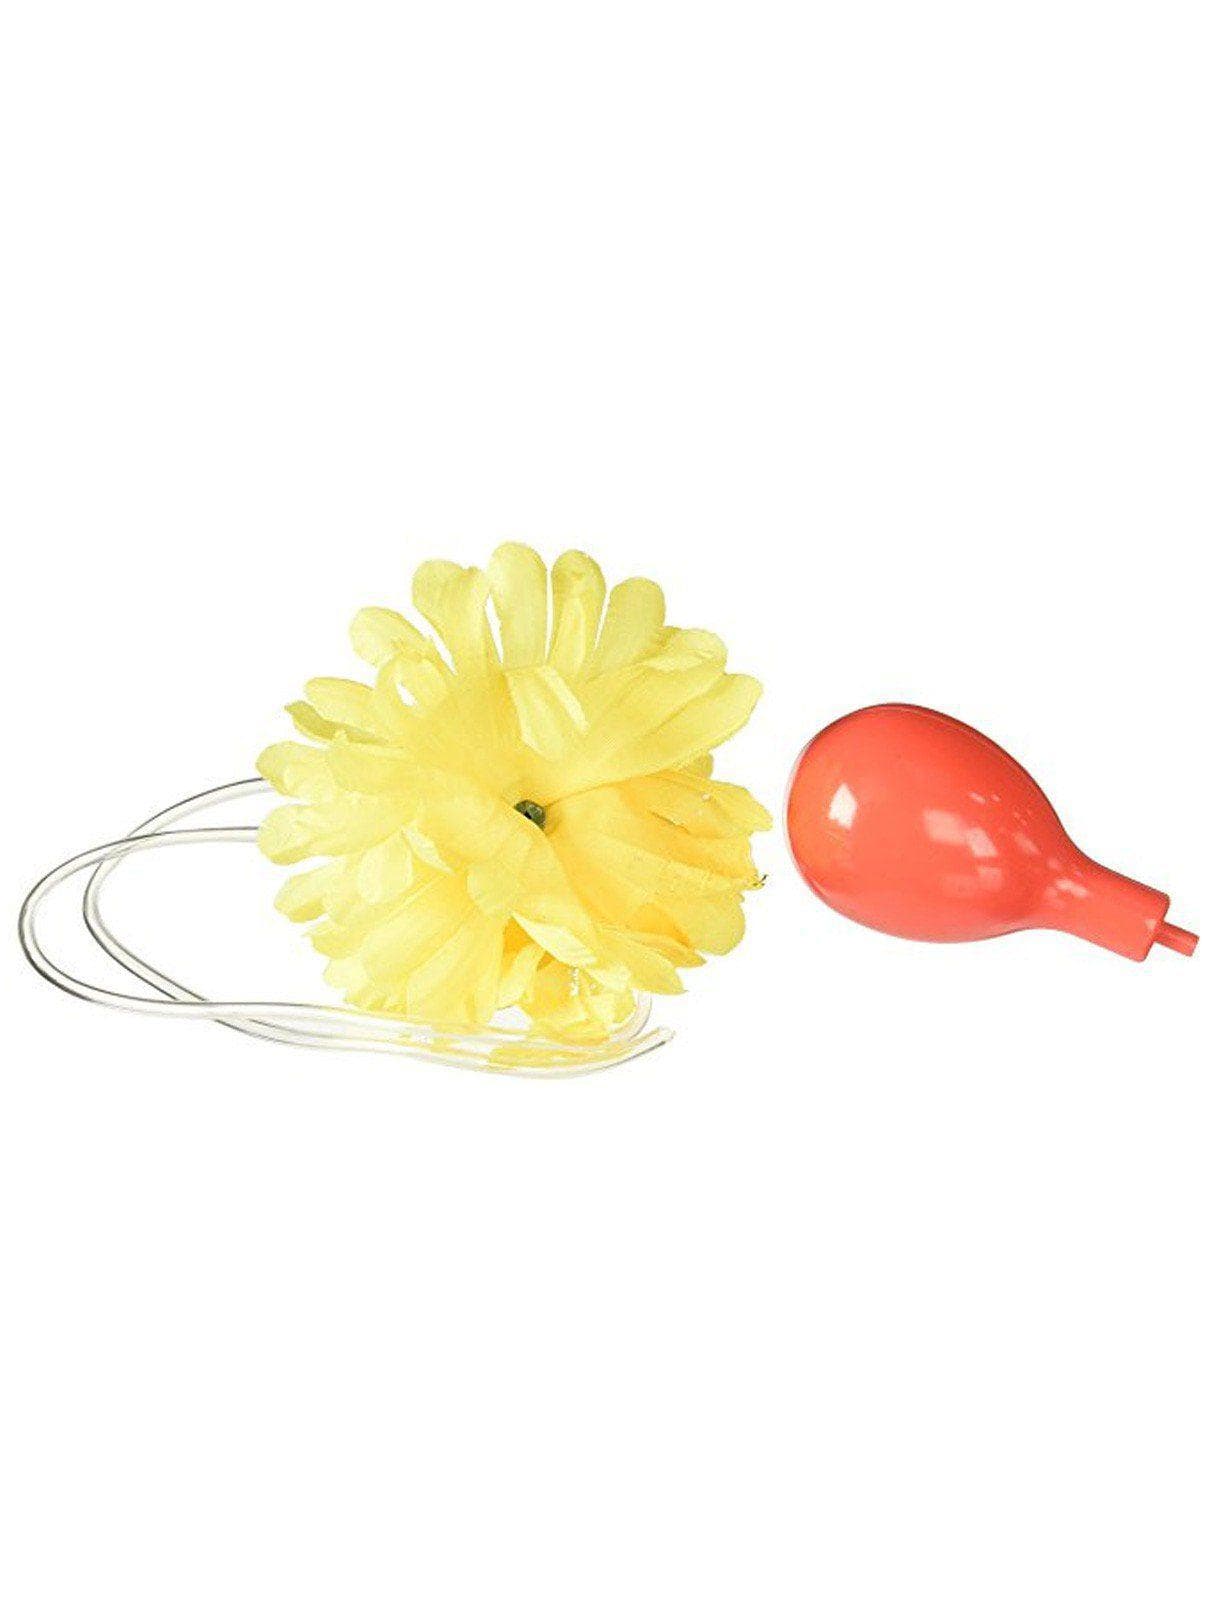 Adult Funny Clown Squirting Flower Prop - costumes.com